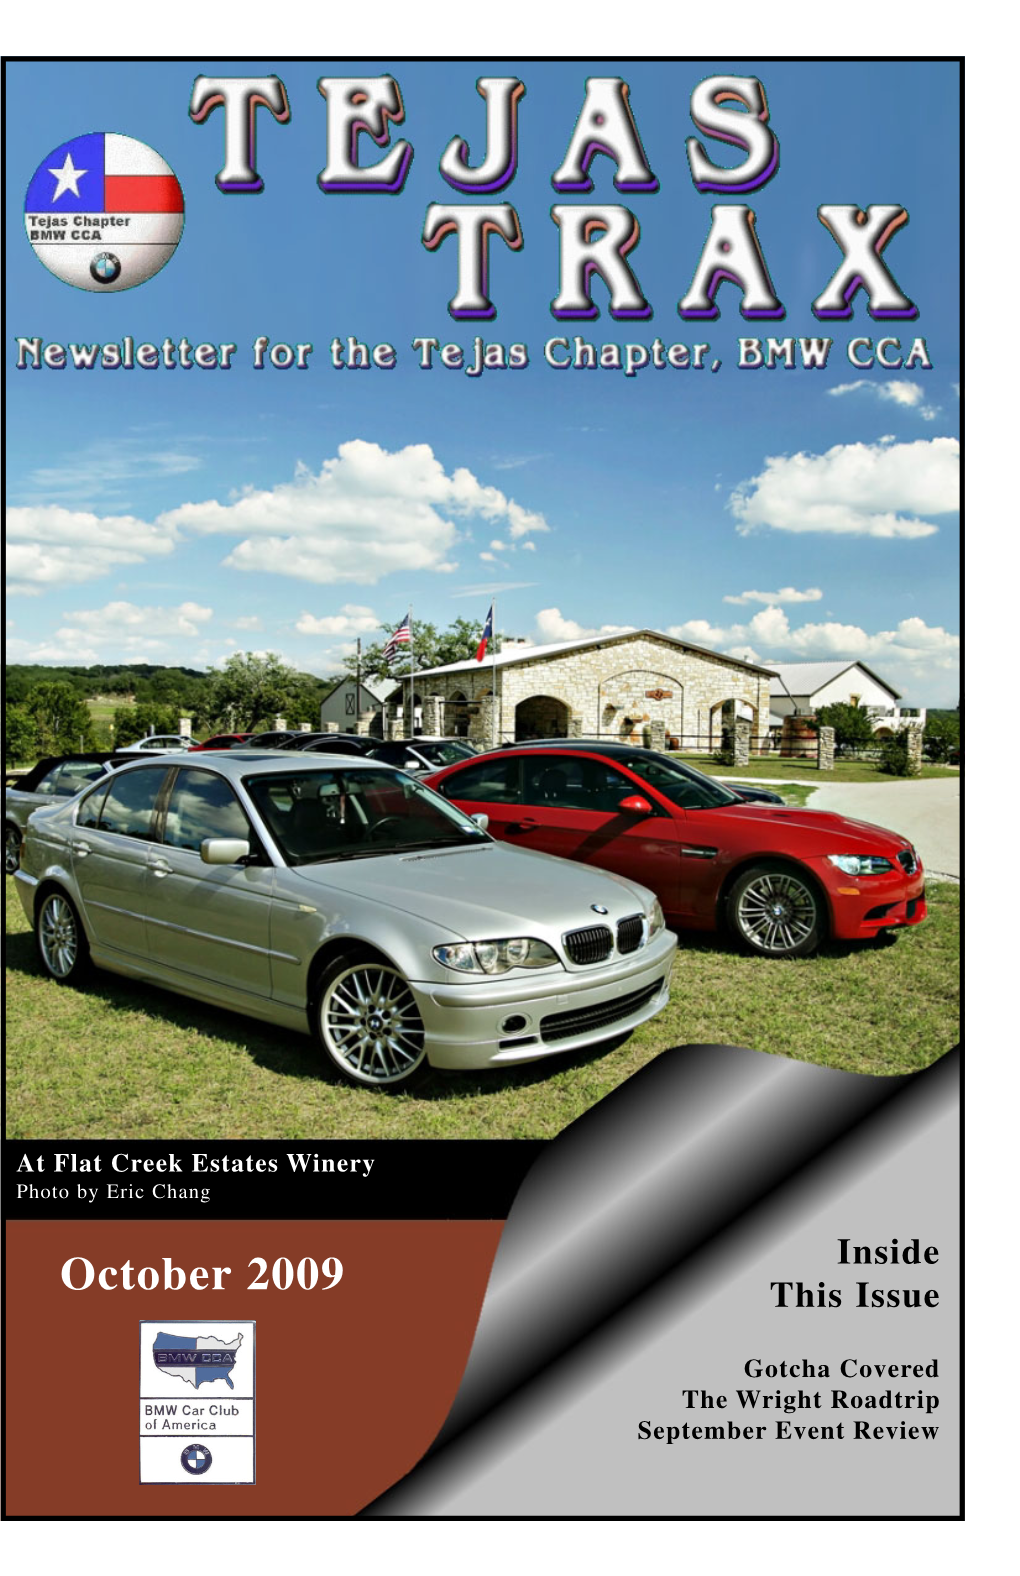 October 2009 This Issue